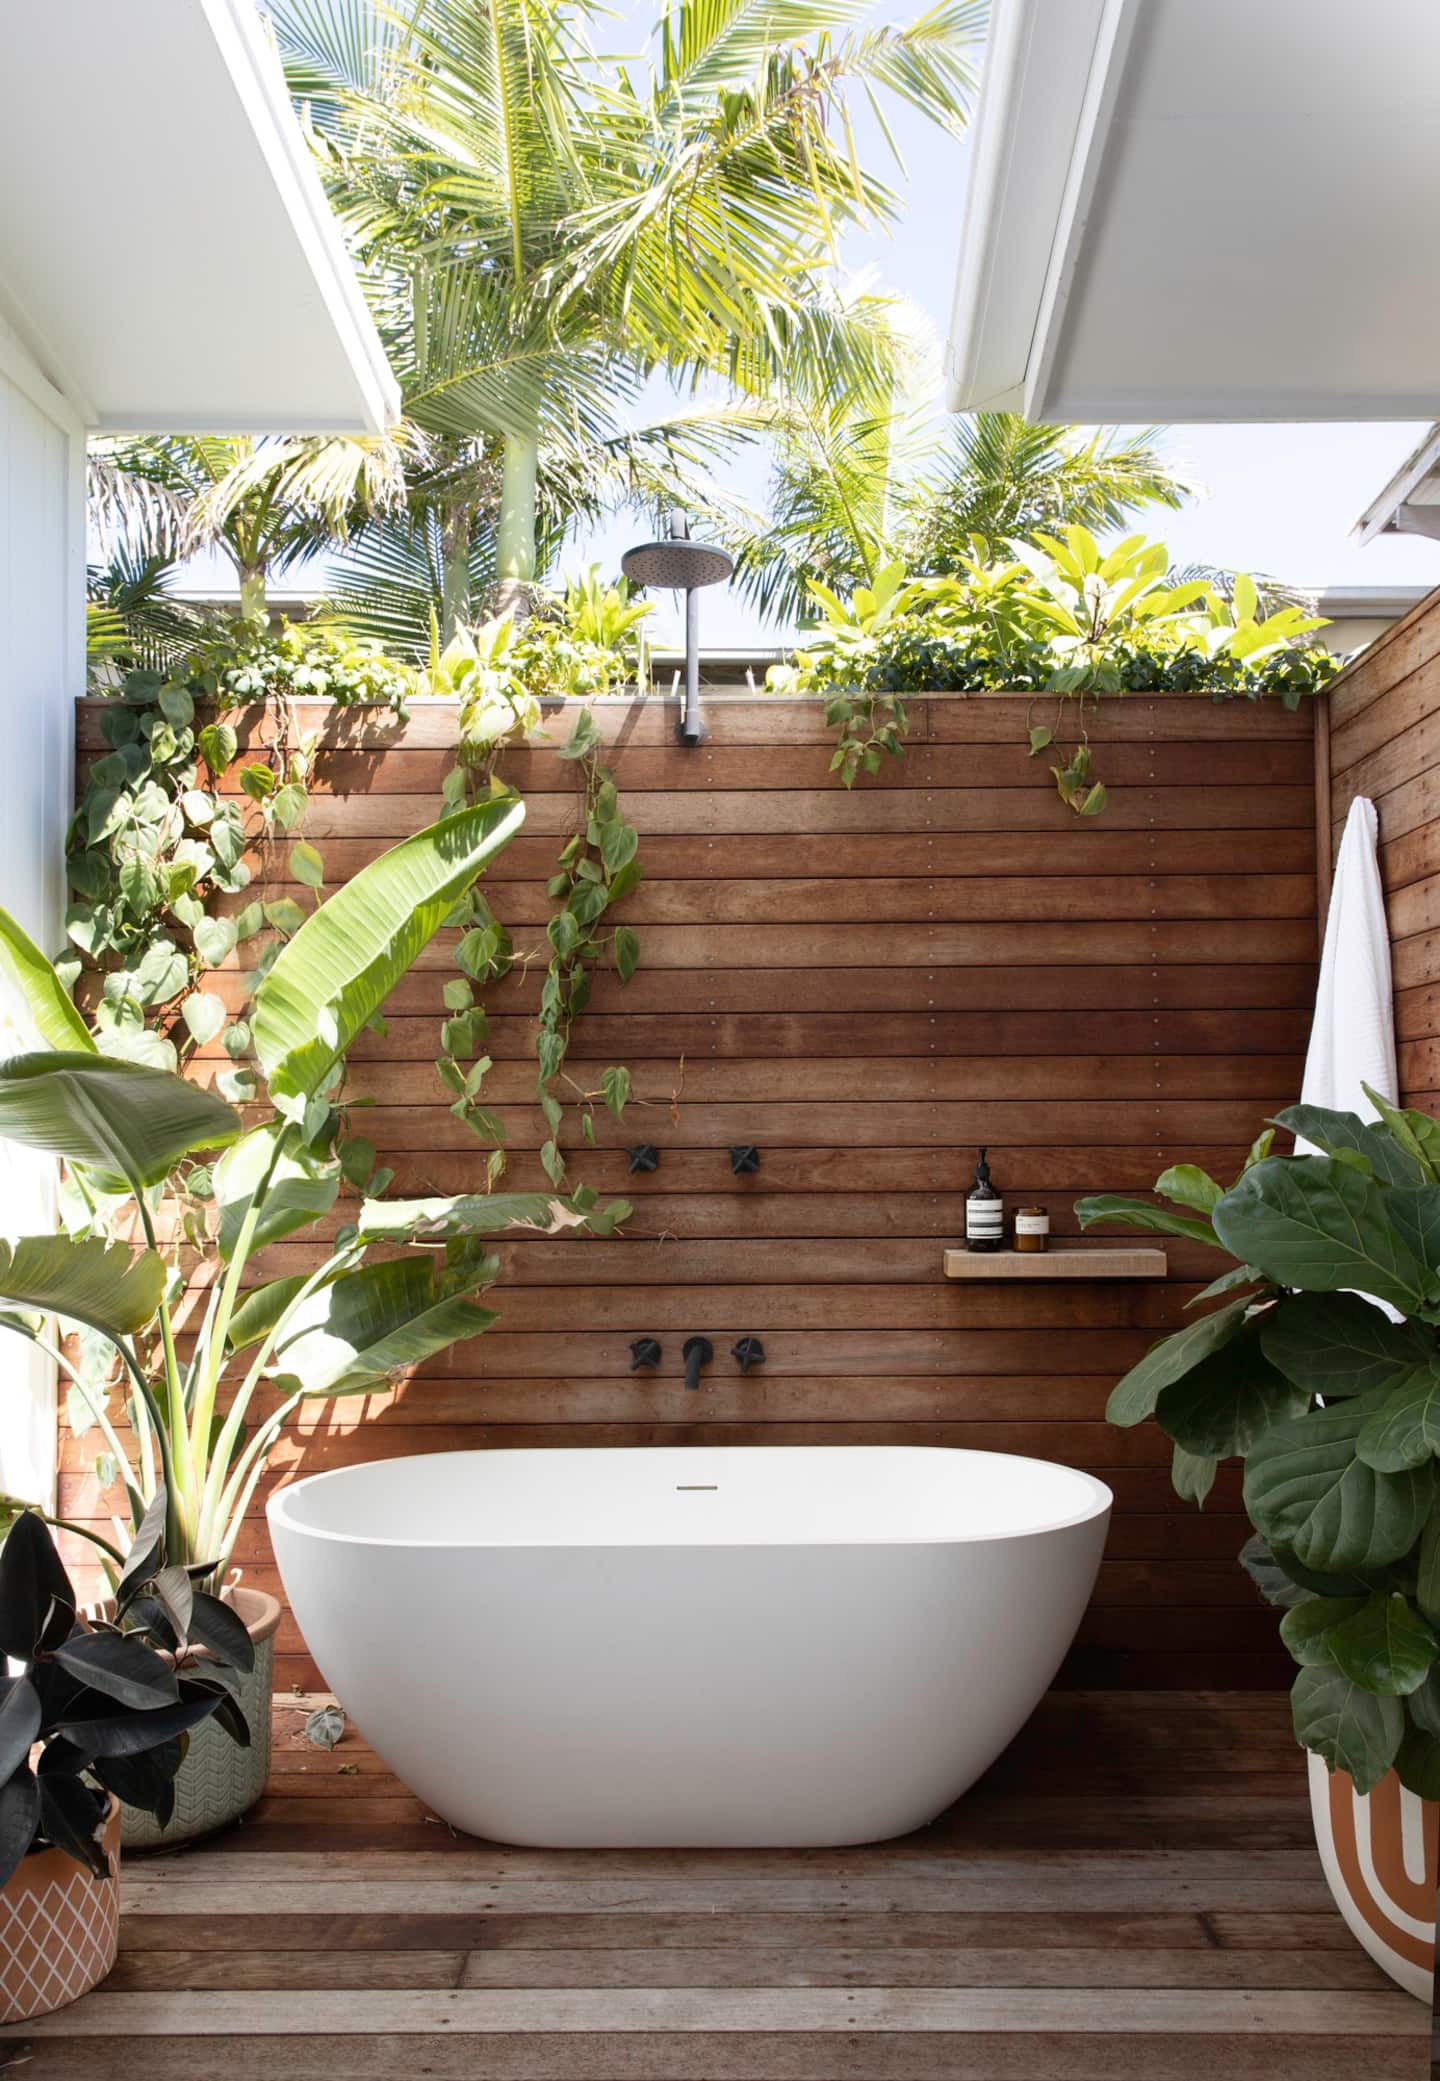 a bath outside surrounded by greenery